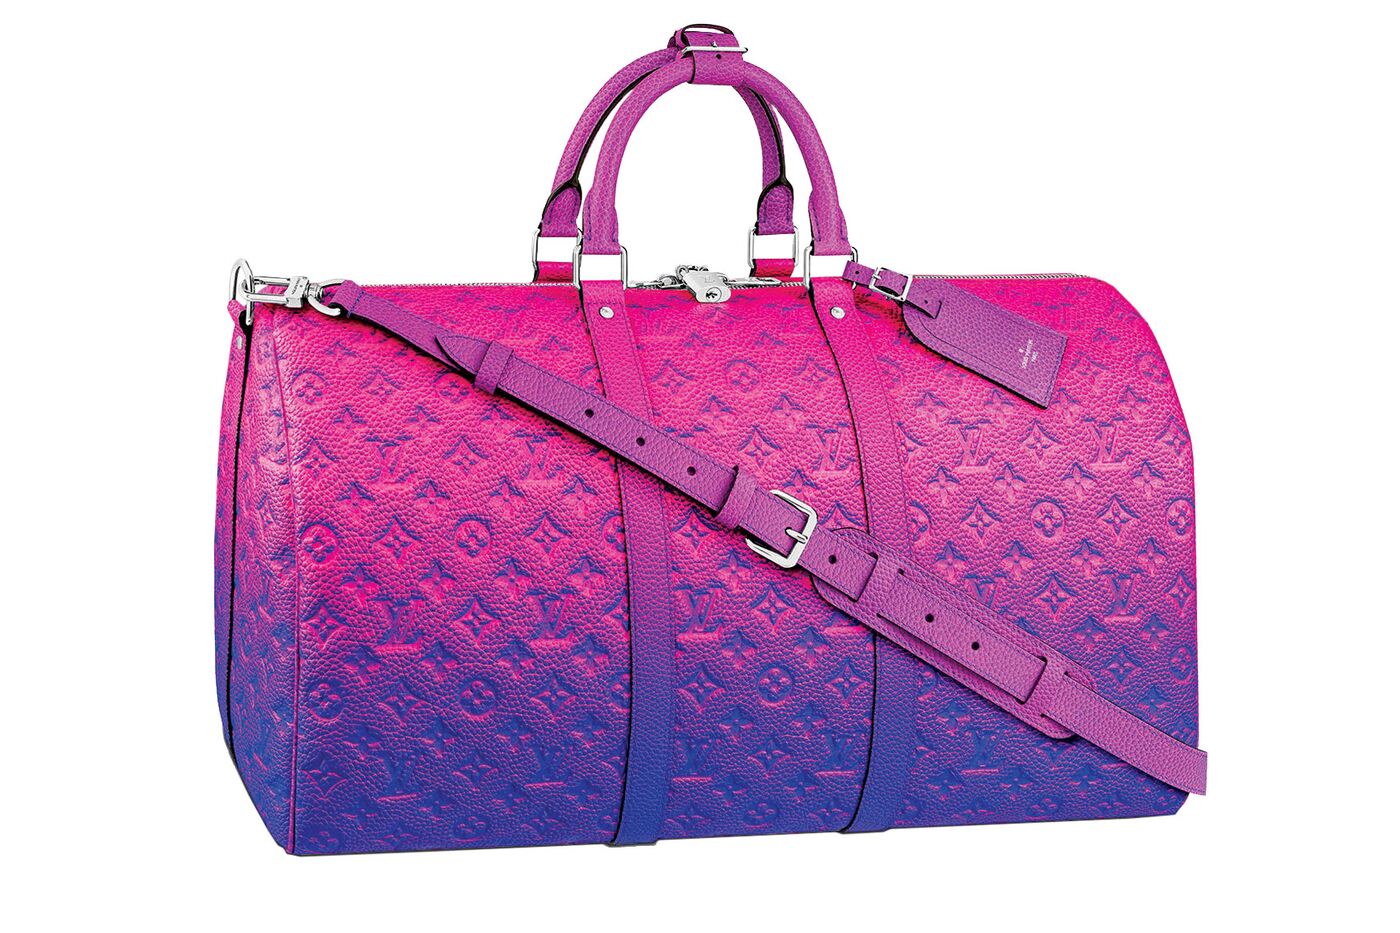 relates to How to Invest in Handbags, the Luxury Asset Most Likely to Hold Value